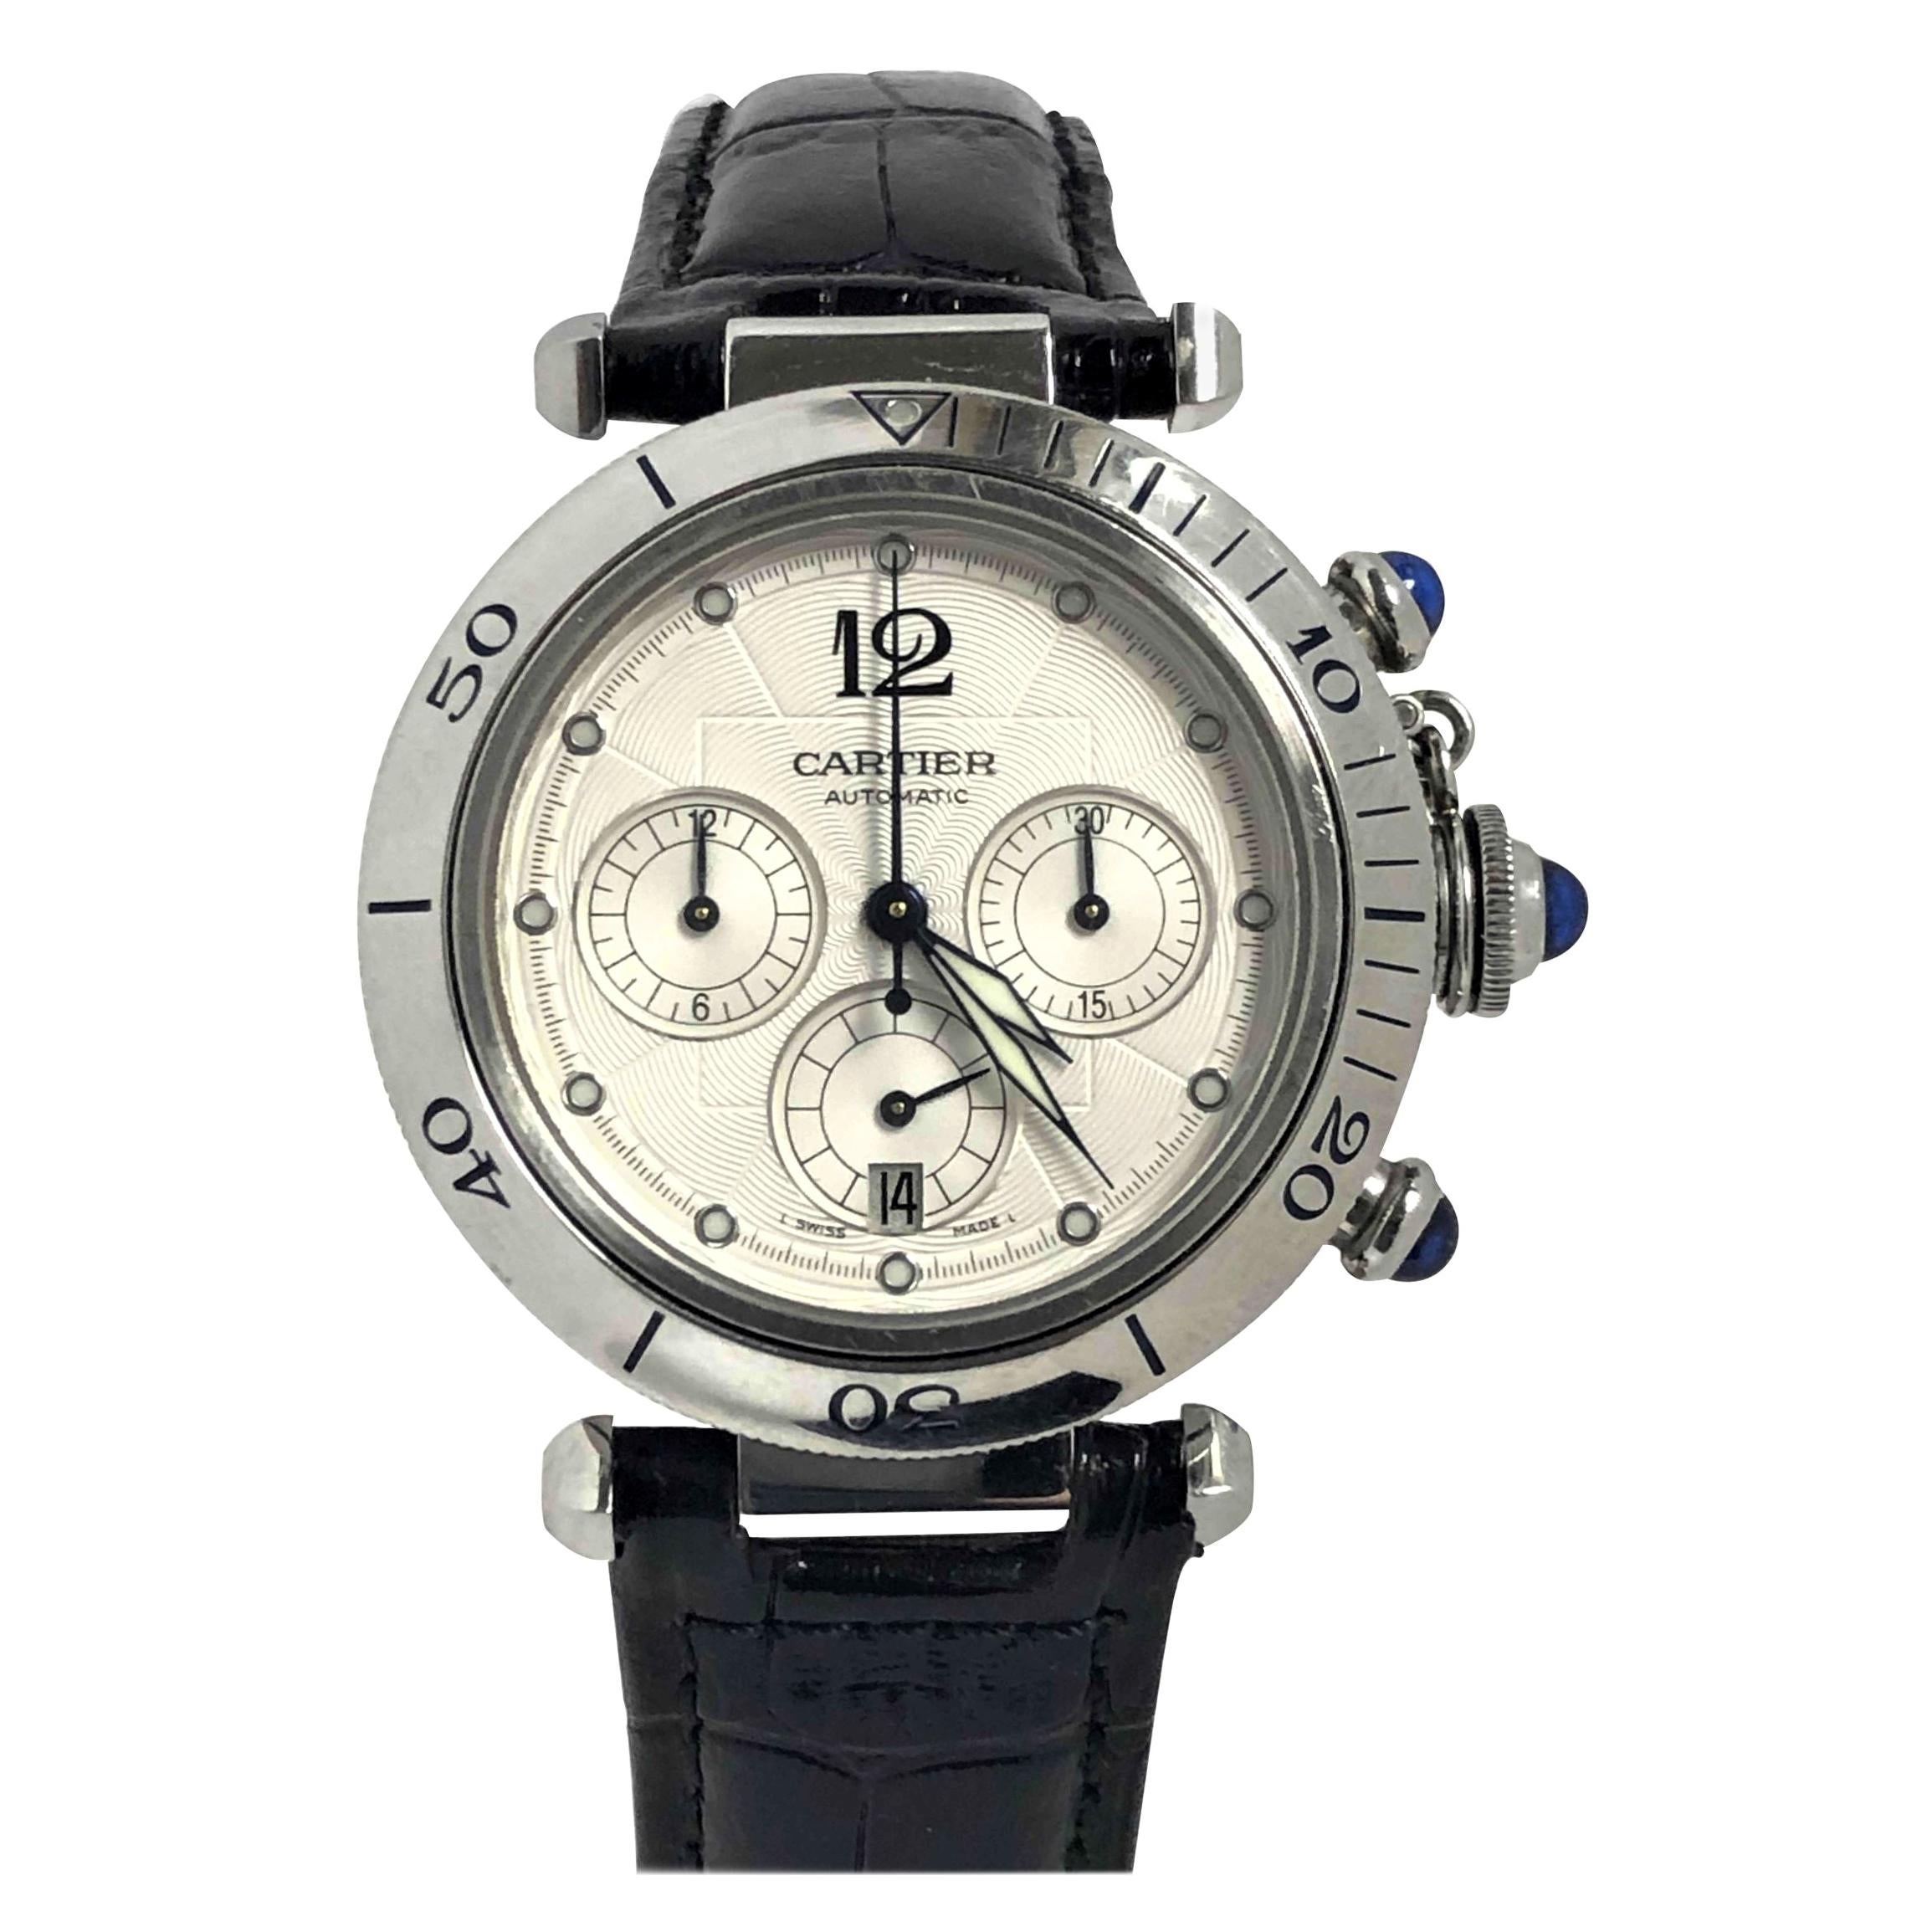 Cartier 2113 Pasha Chronograph Stainless Steel Automatic Wristwatch